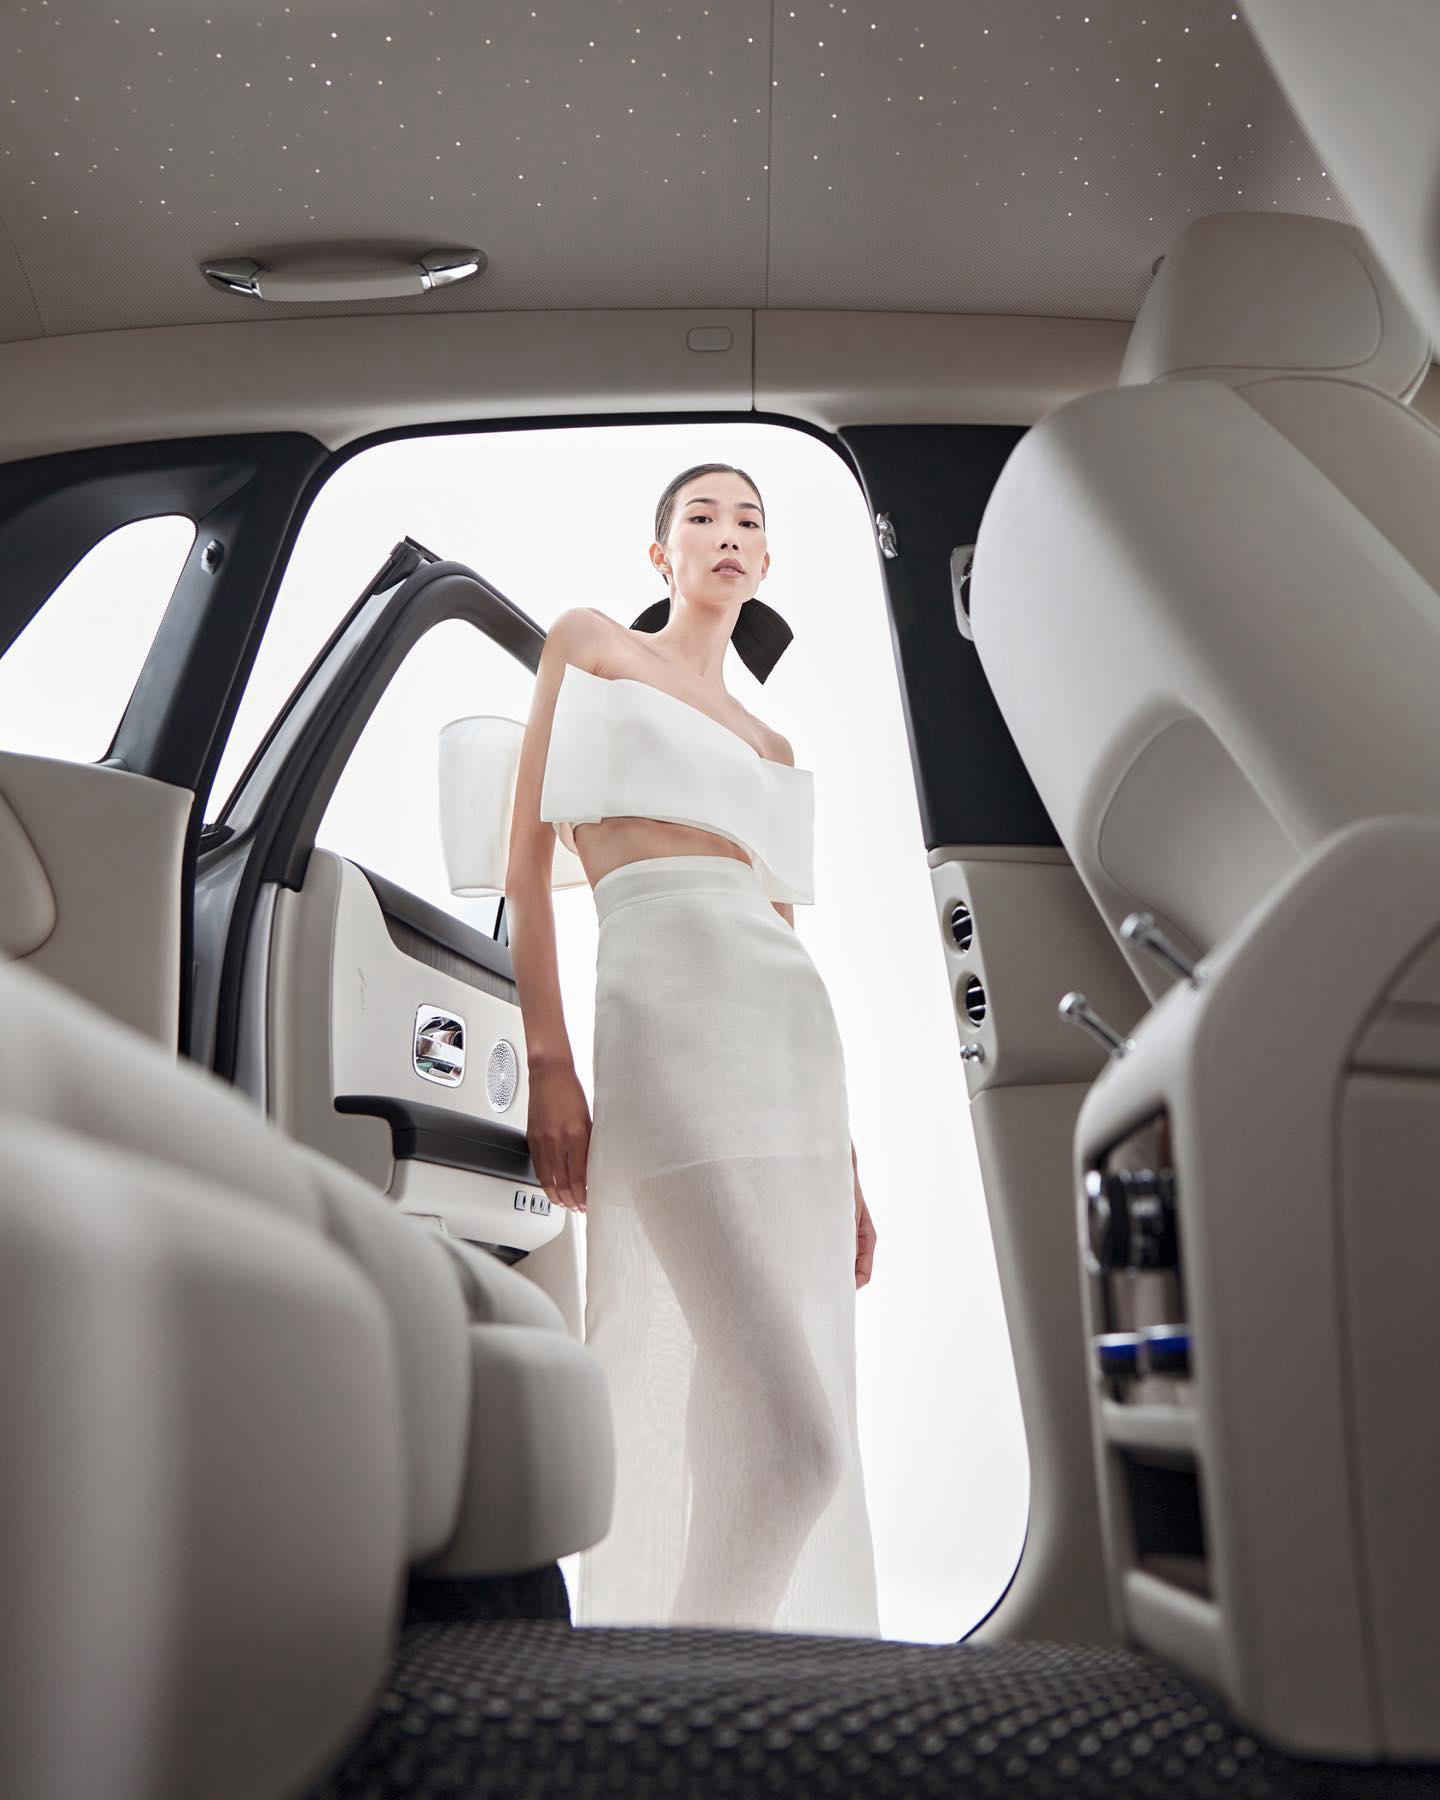 Rolls-Royce Motor Cars - The Purity Collection by fashion designer Nguyen Hoang Tu is inspired by th